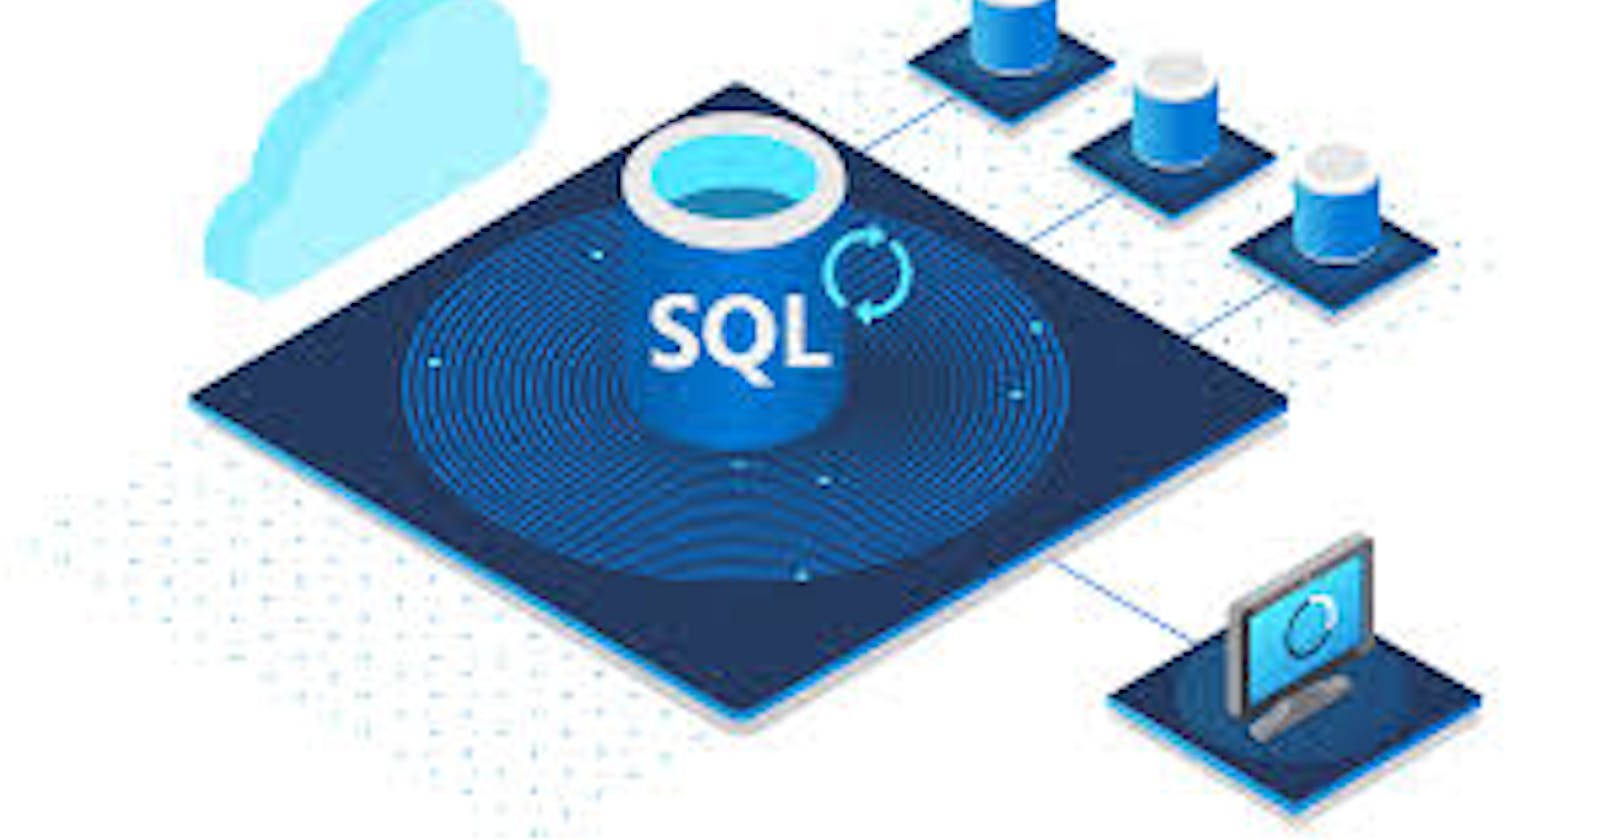 How to provision an Azure SQL Database with Active Directory authentication